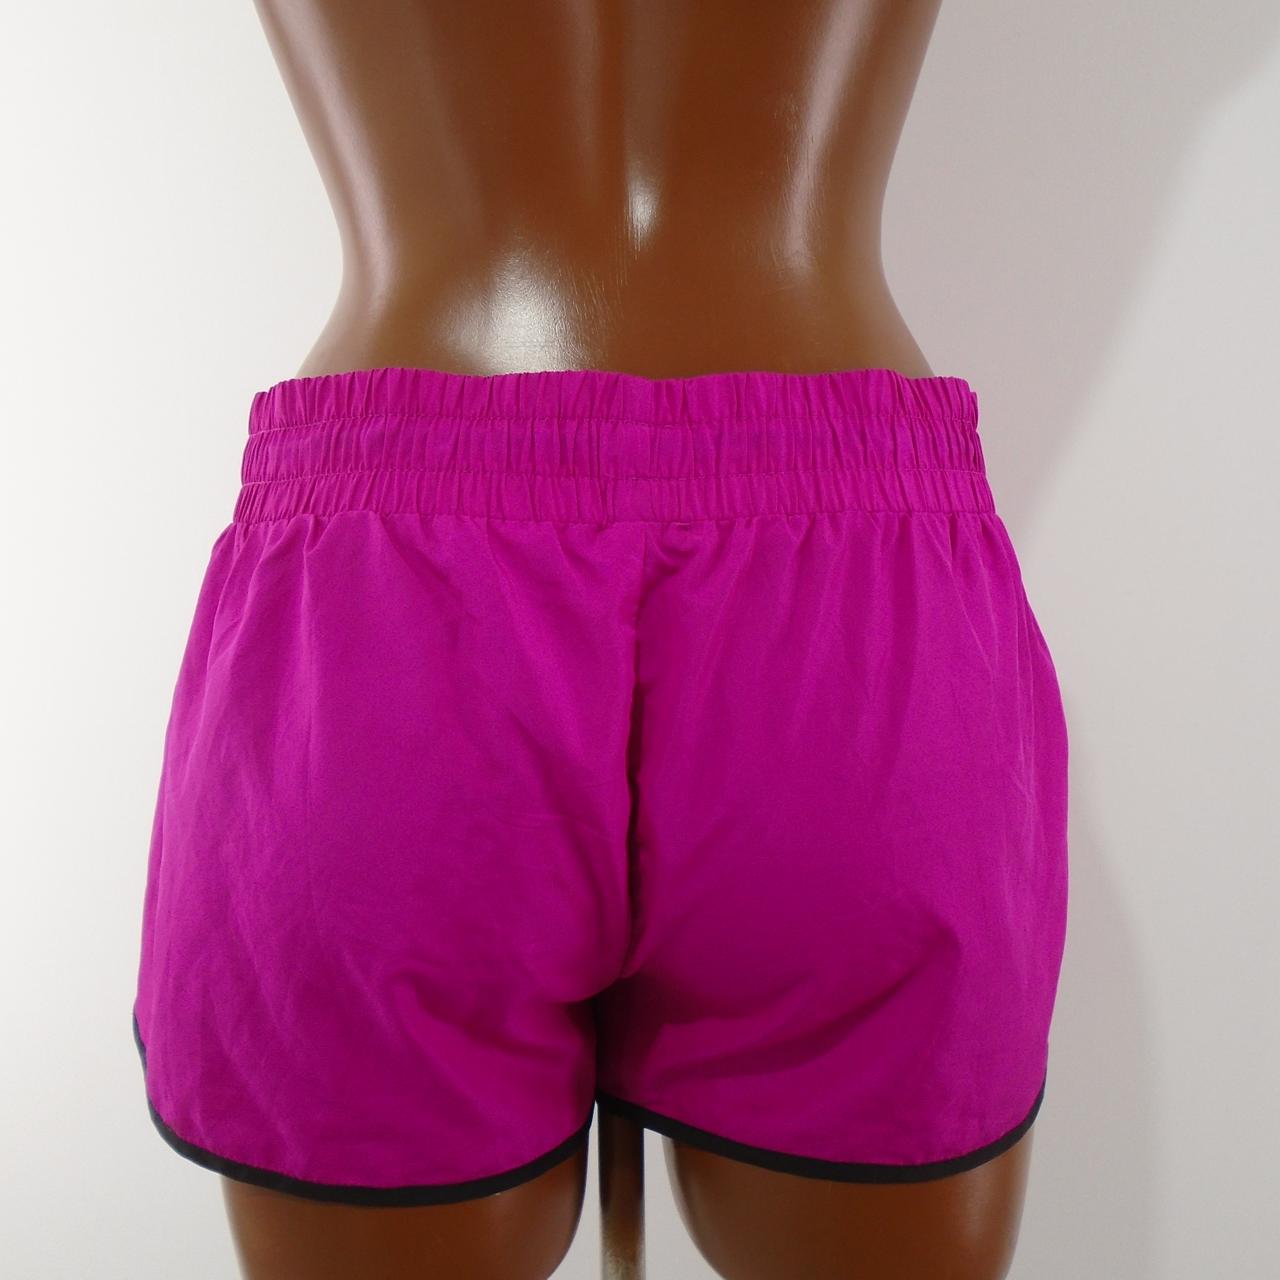 Women's Shorts Calzedonia. Pink. S. Used. Good